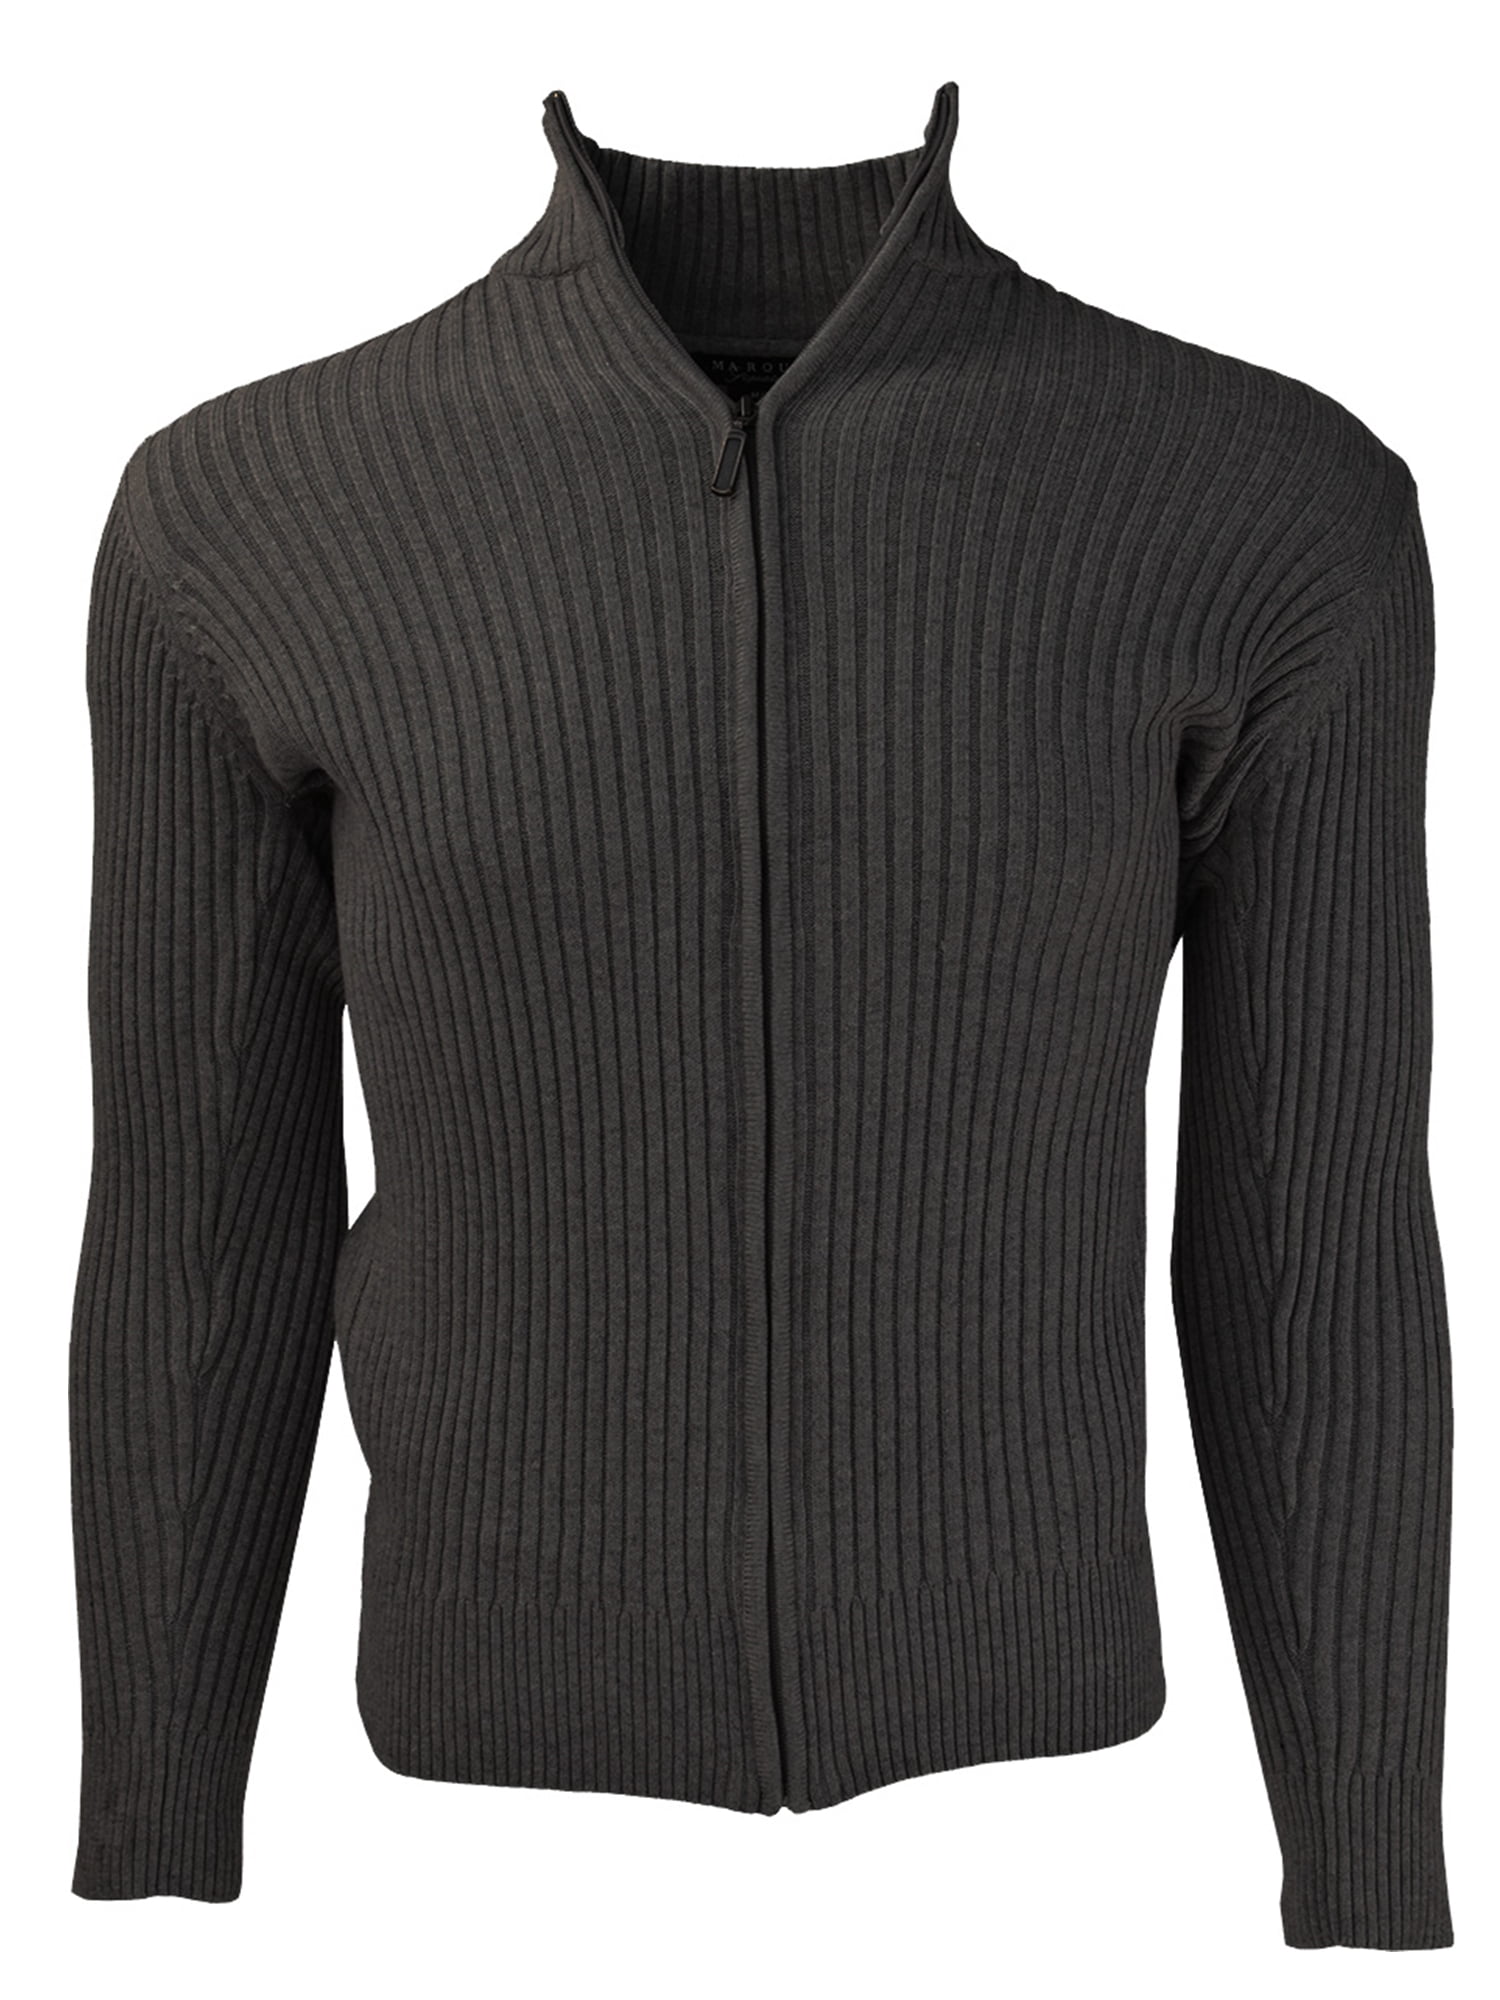 Charcoal Grey Full Zip Cotton Ribbed Mock Neck Sweater for Men M ...